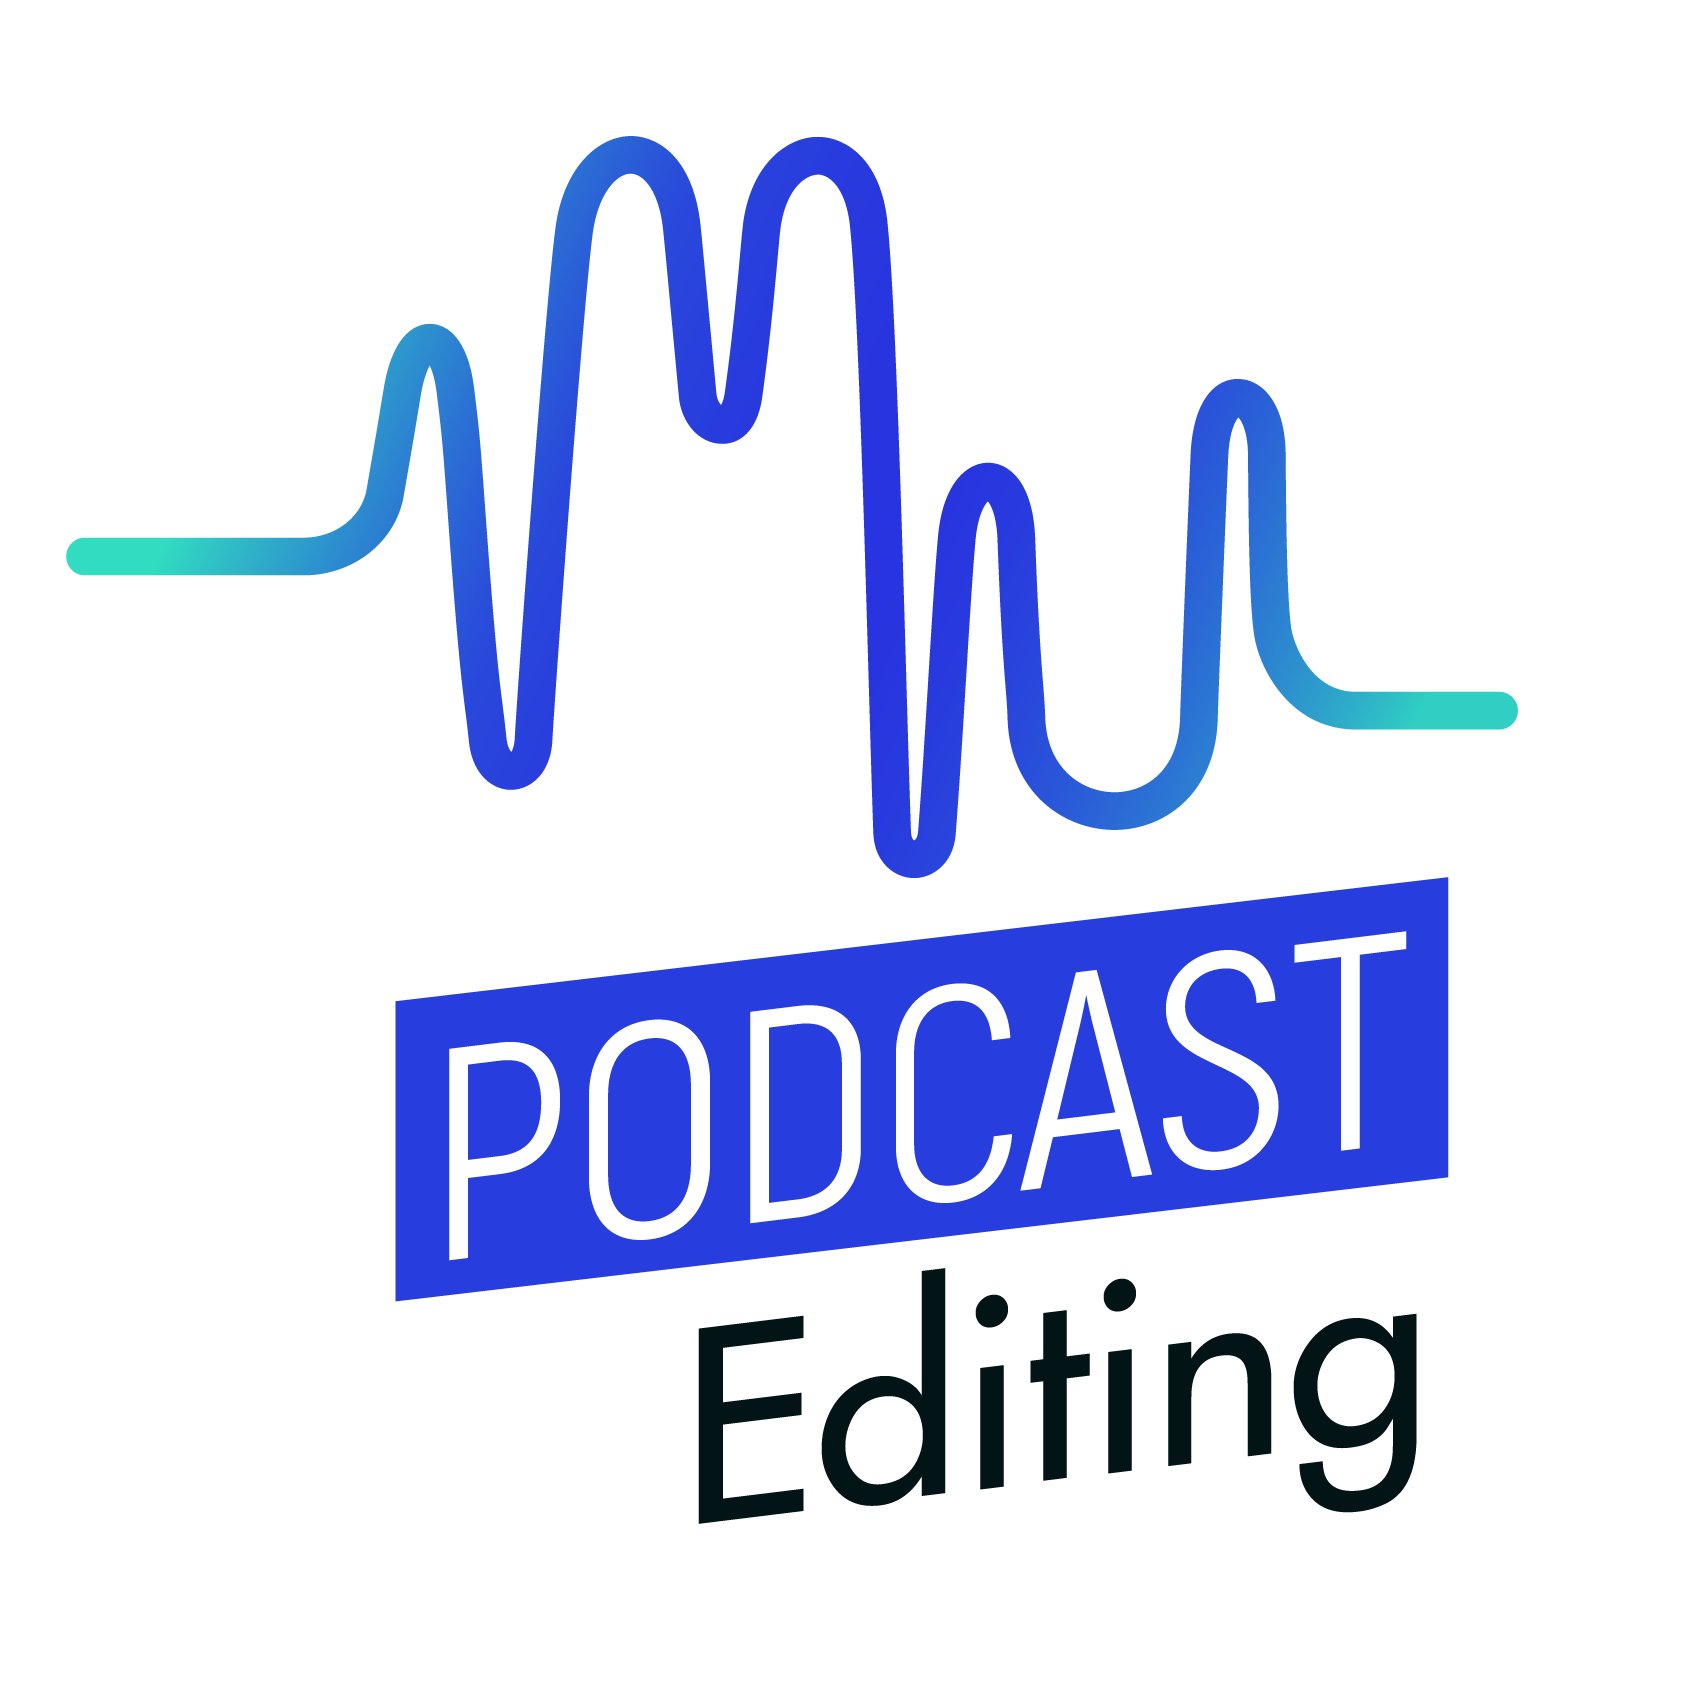 Podcast editing company. We help you grow your podcast as a communication and marketing tool.